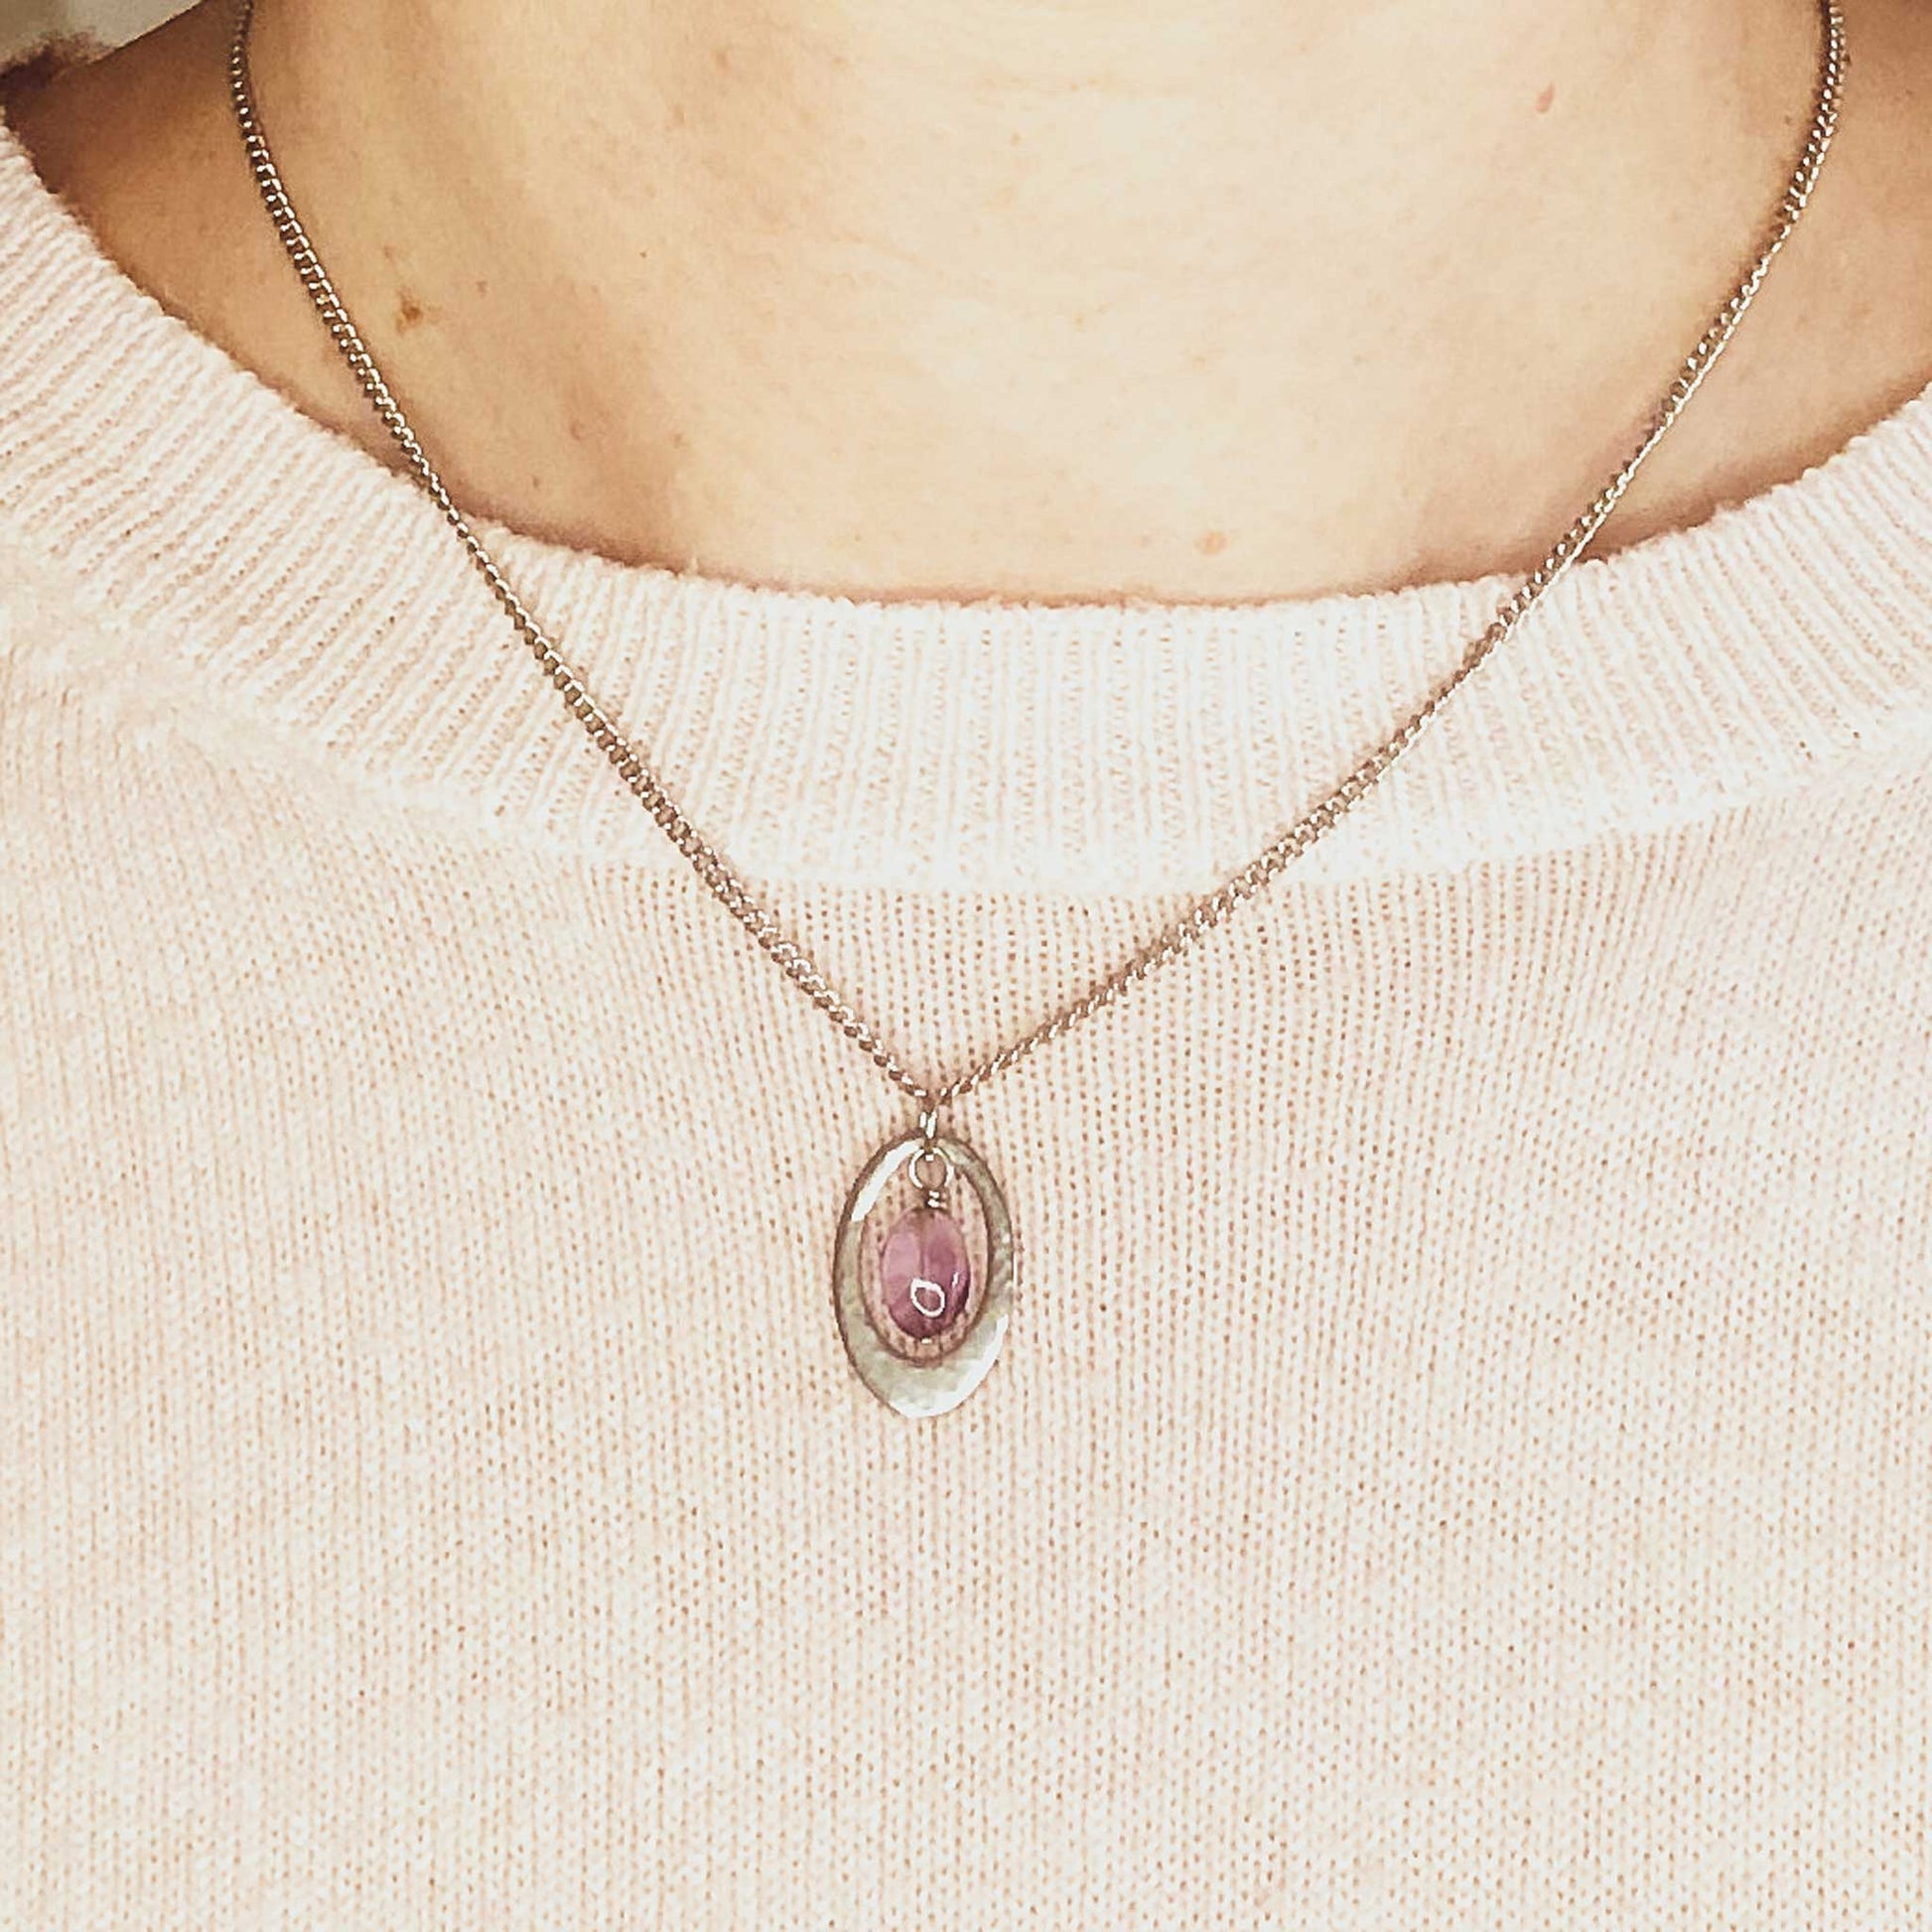 Woman wearing pink jumper and oval shaped Amethyst pendant necklace.